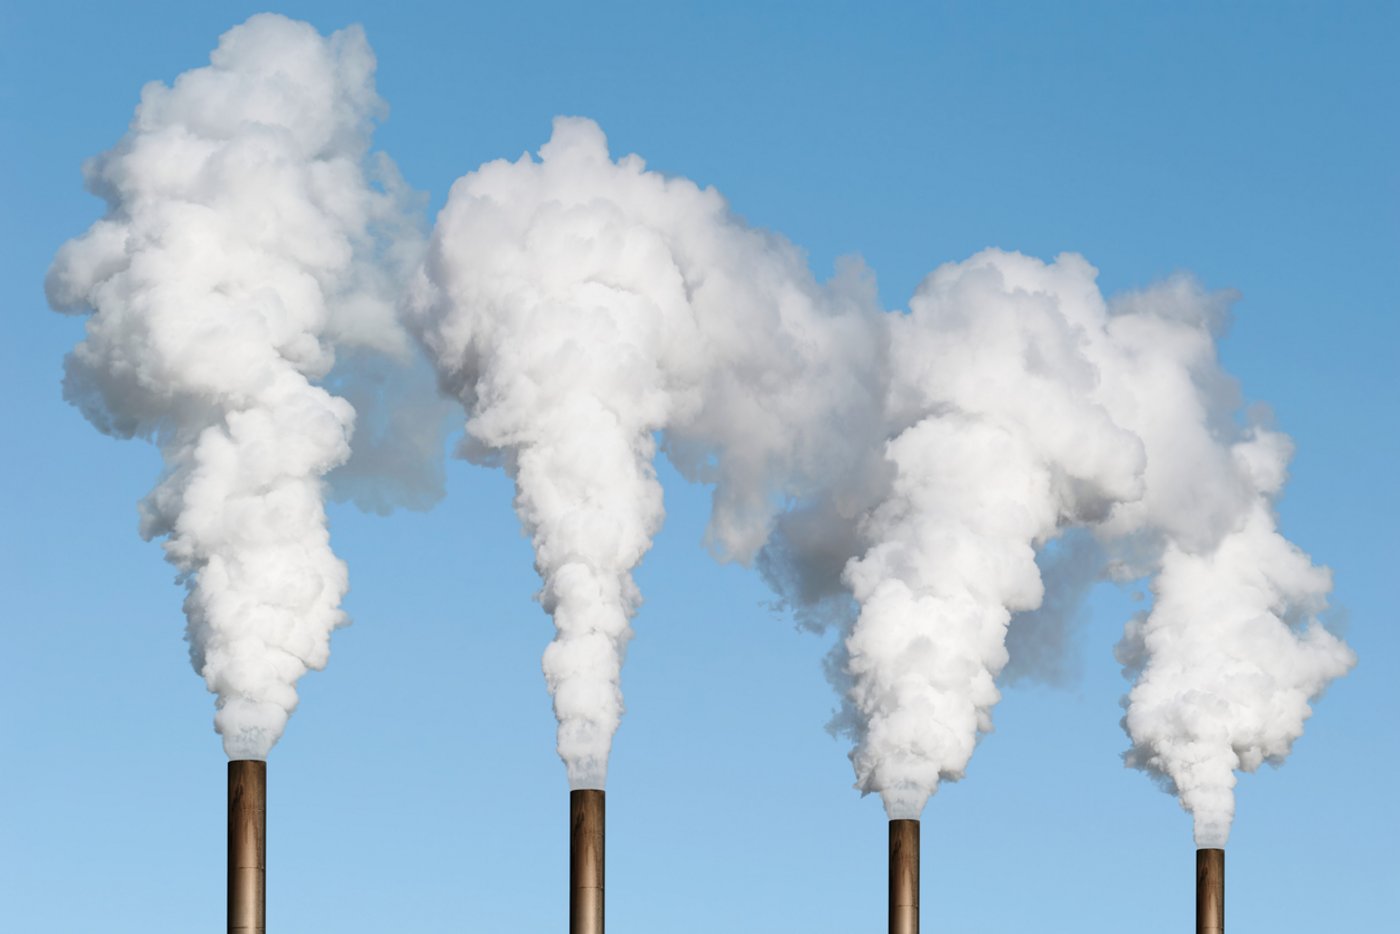 Fit for 55: EU-Emission Trading Scheme (EU ETS I) for Industry and Energy